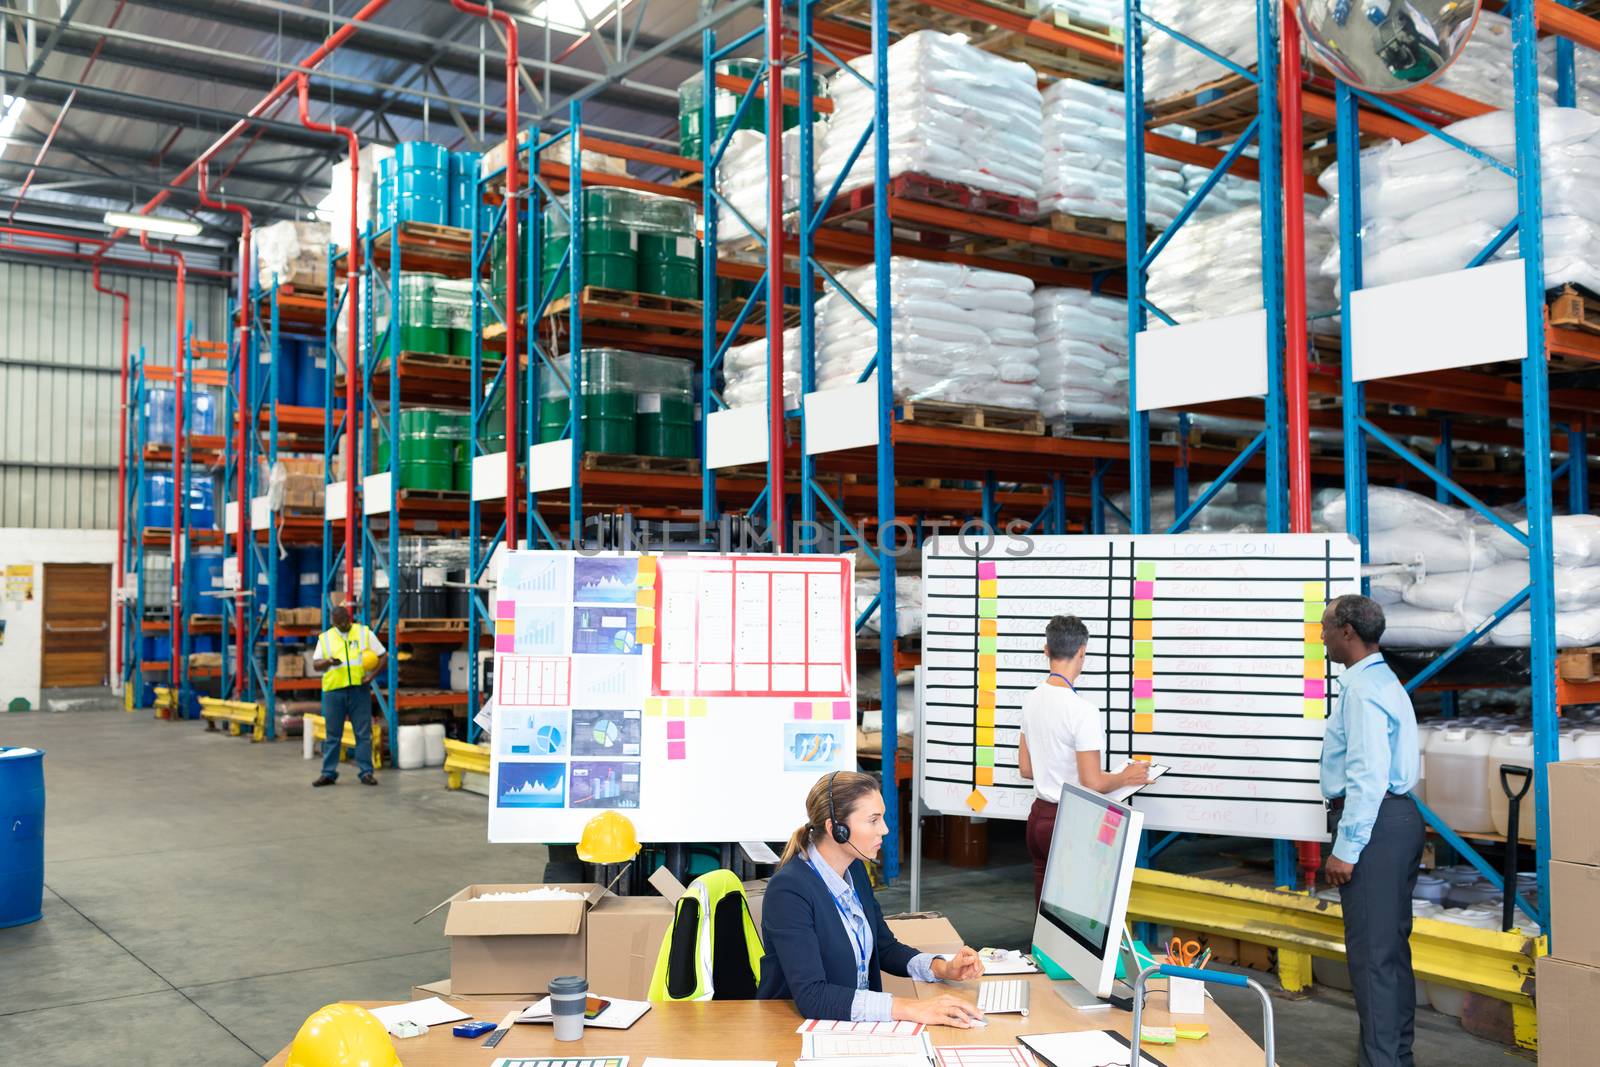 High angle view of Caucasian female manager working on computer while coworkers discussing over whiteboard in warehouse. This is a freight transportation and distribution warehouse. Industrial and industrial workers concept